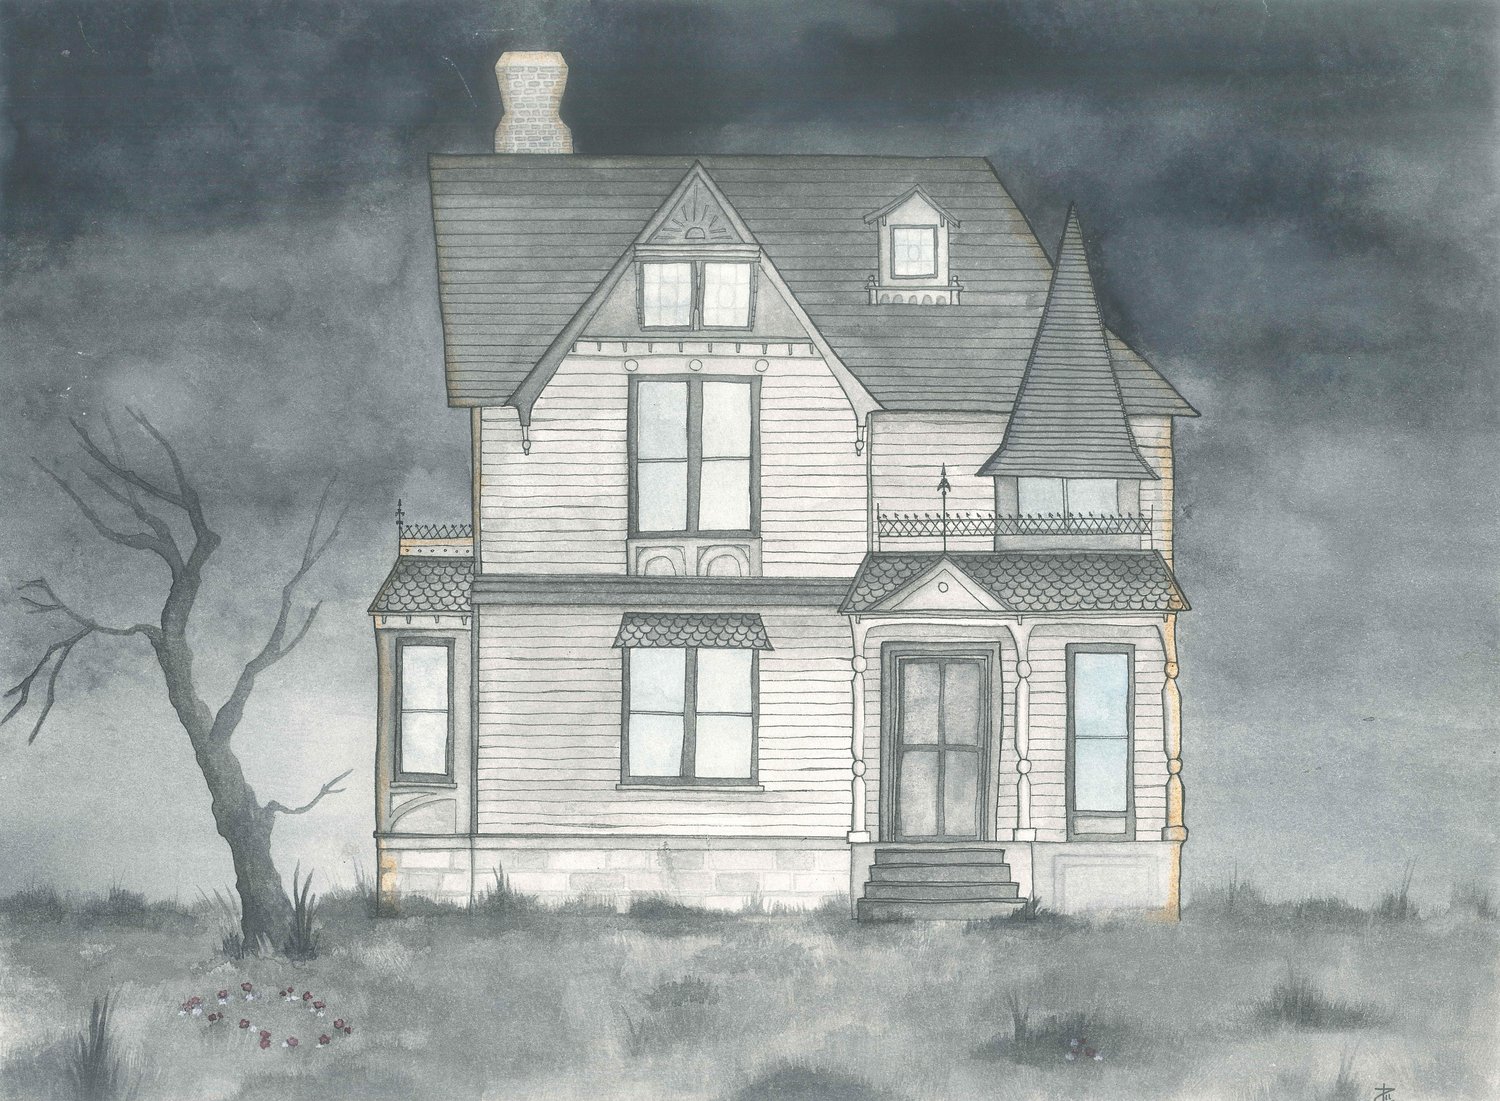 Every House is Haunted